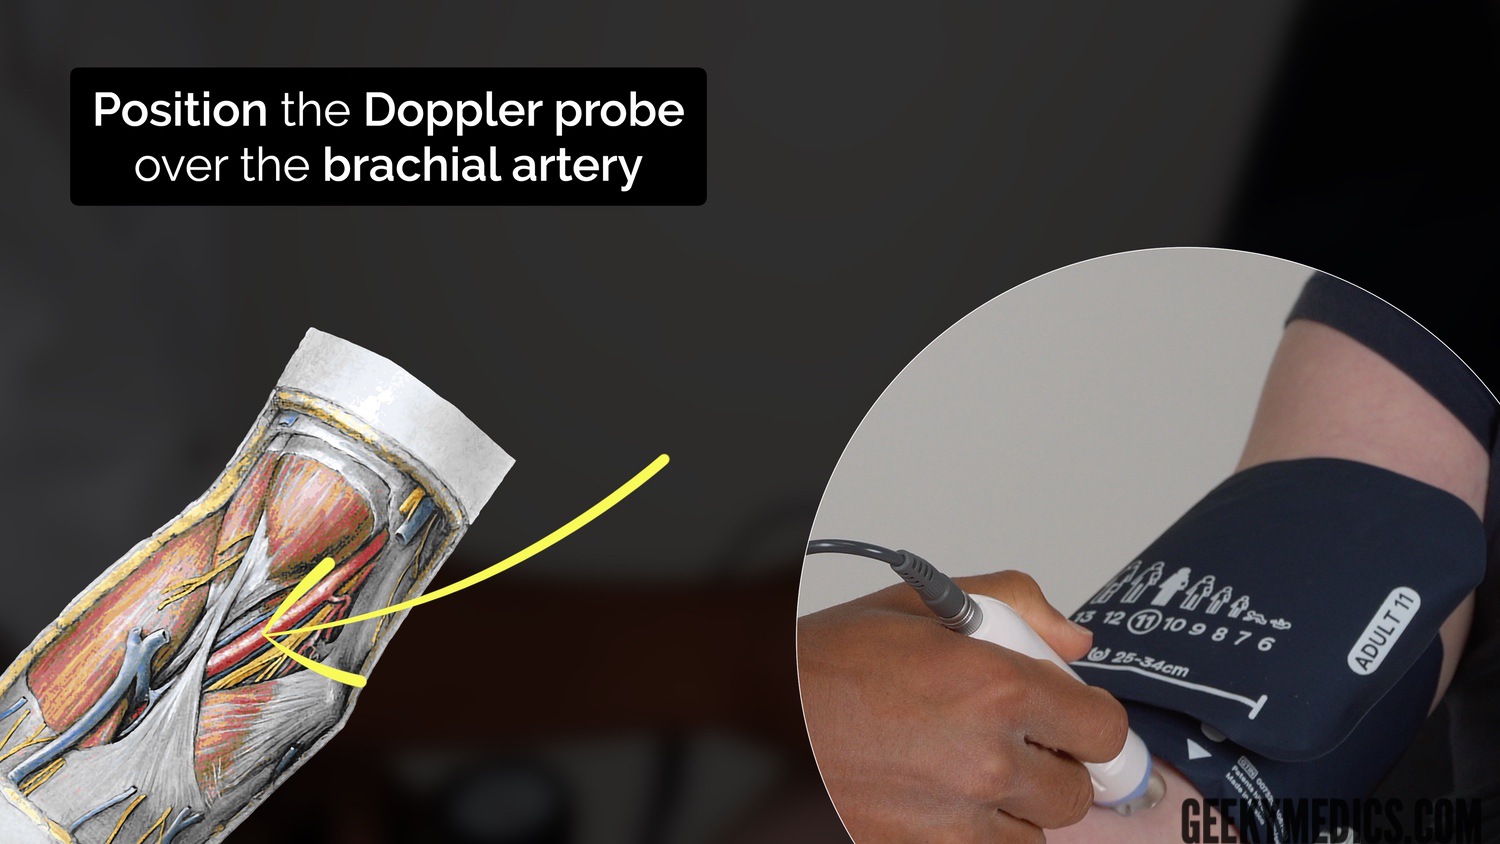 Place the sphygmomanometer cuff over the arm proximal to the brachial artery and position the Doppler probe on the brachial artery at a 45° angle (medial to the biceps tendon in the antecubital fossa)